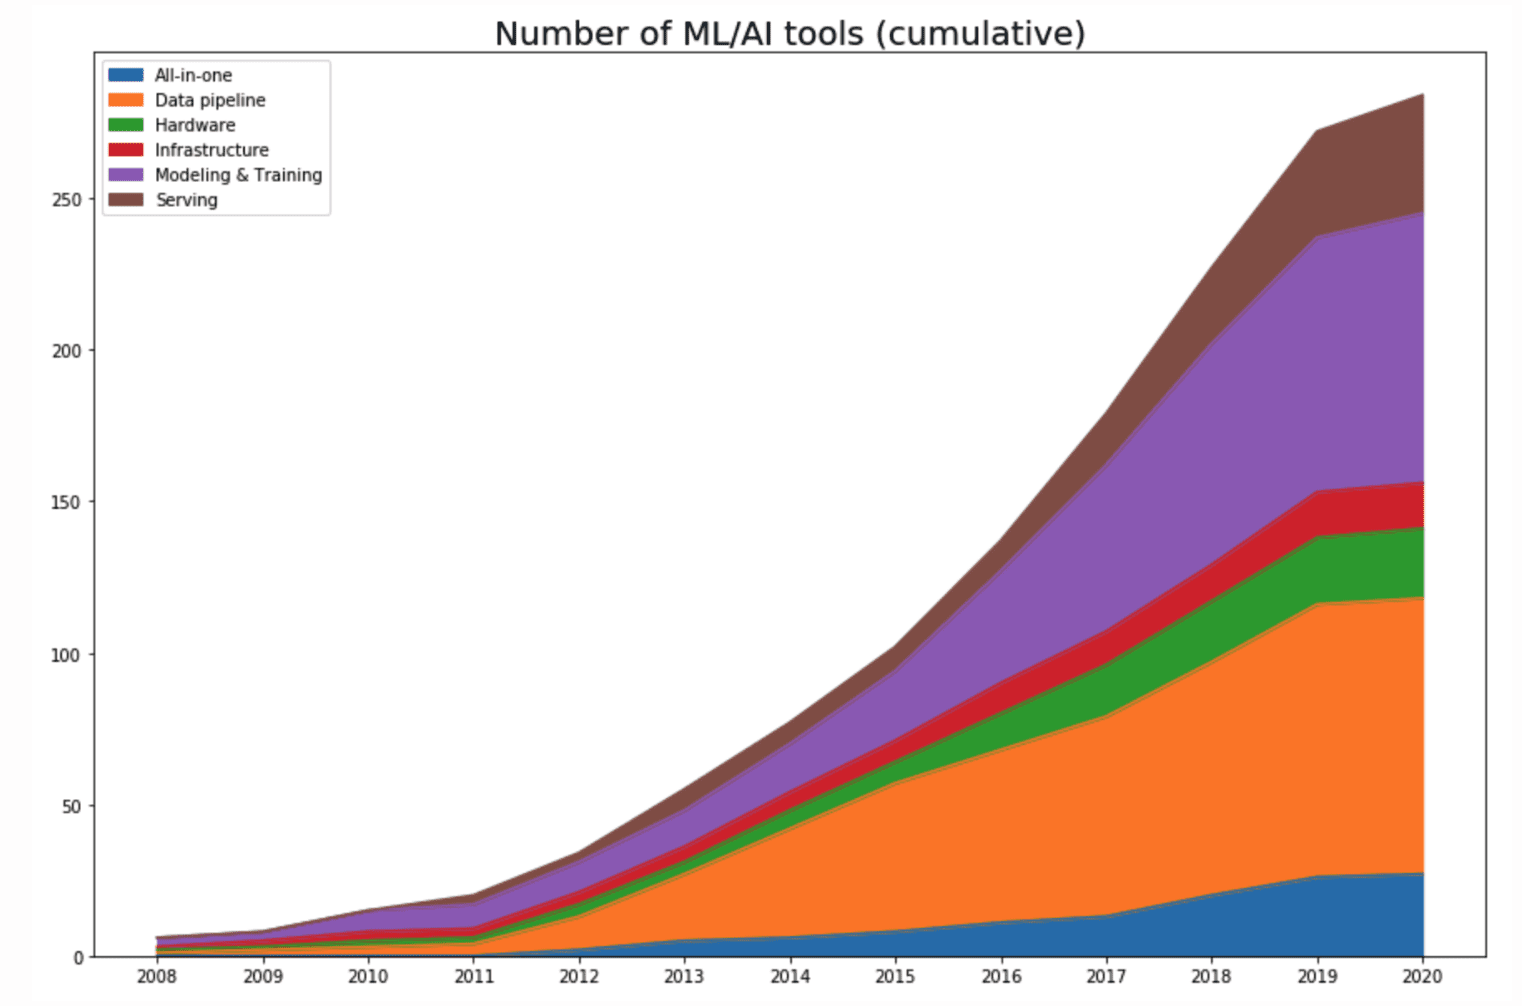 Graph showing years on x-axis from 2008 to 2020 and number of ML tools on the y-axis. The graph shows a hockey-stick growth of less than 50 ML tools in 2008 to more than 200 ML tools in 2020.